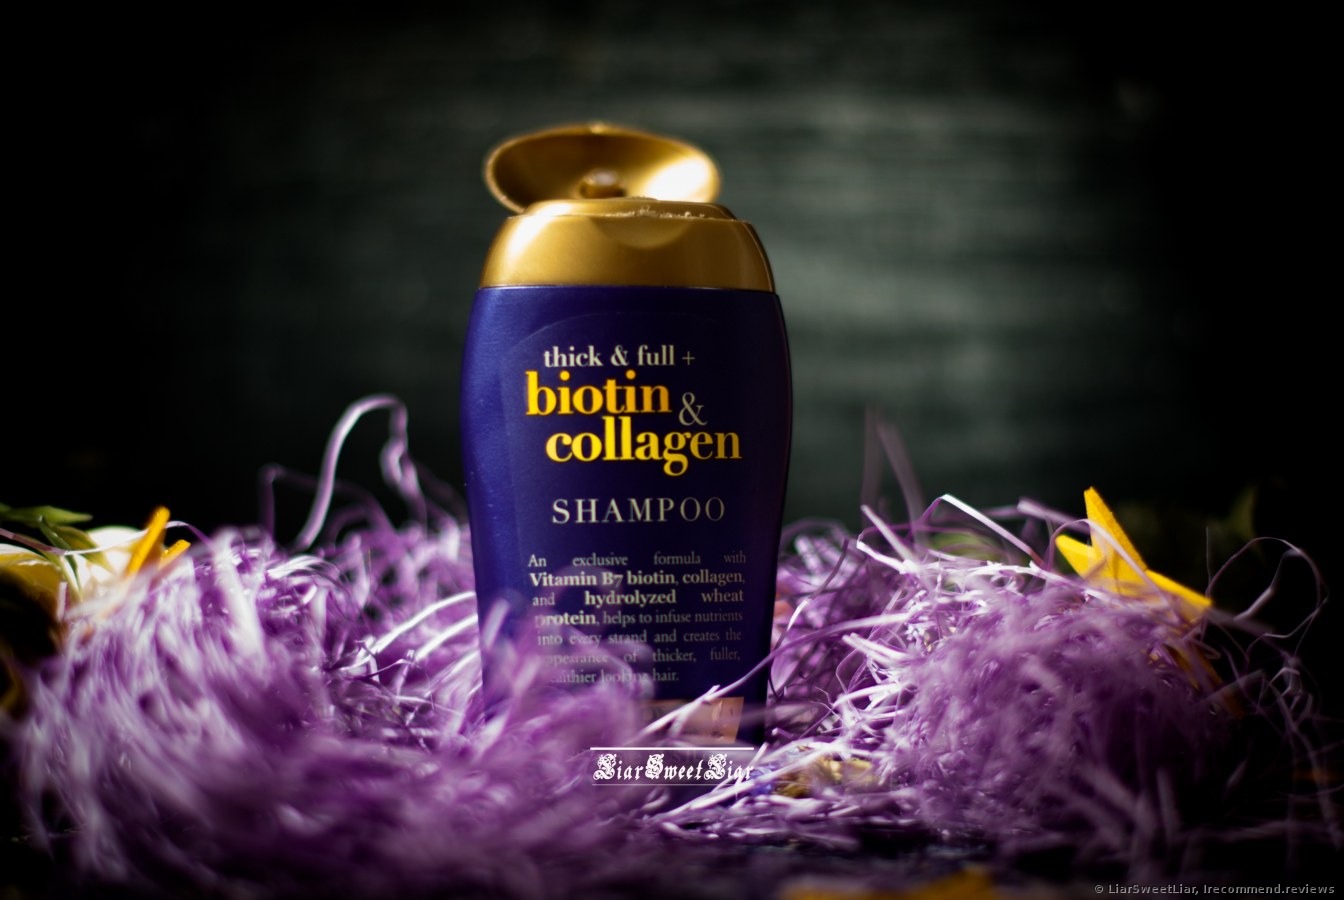 OGX Thick & Full Biotin & Collagen Shampoo - «Don't expect stunning volume to hair roots. But in general the OGX Thick & Full Biotin & Collagen is a soft